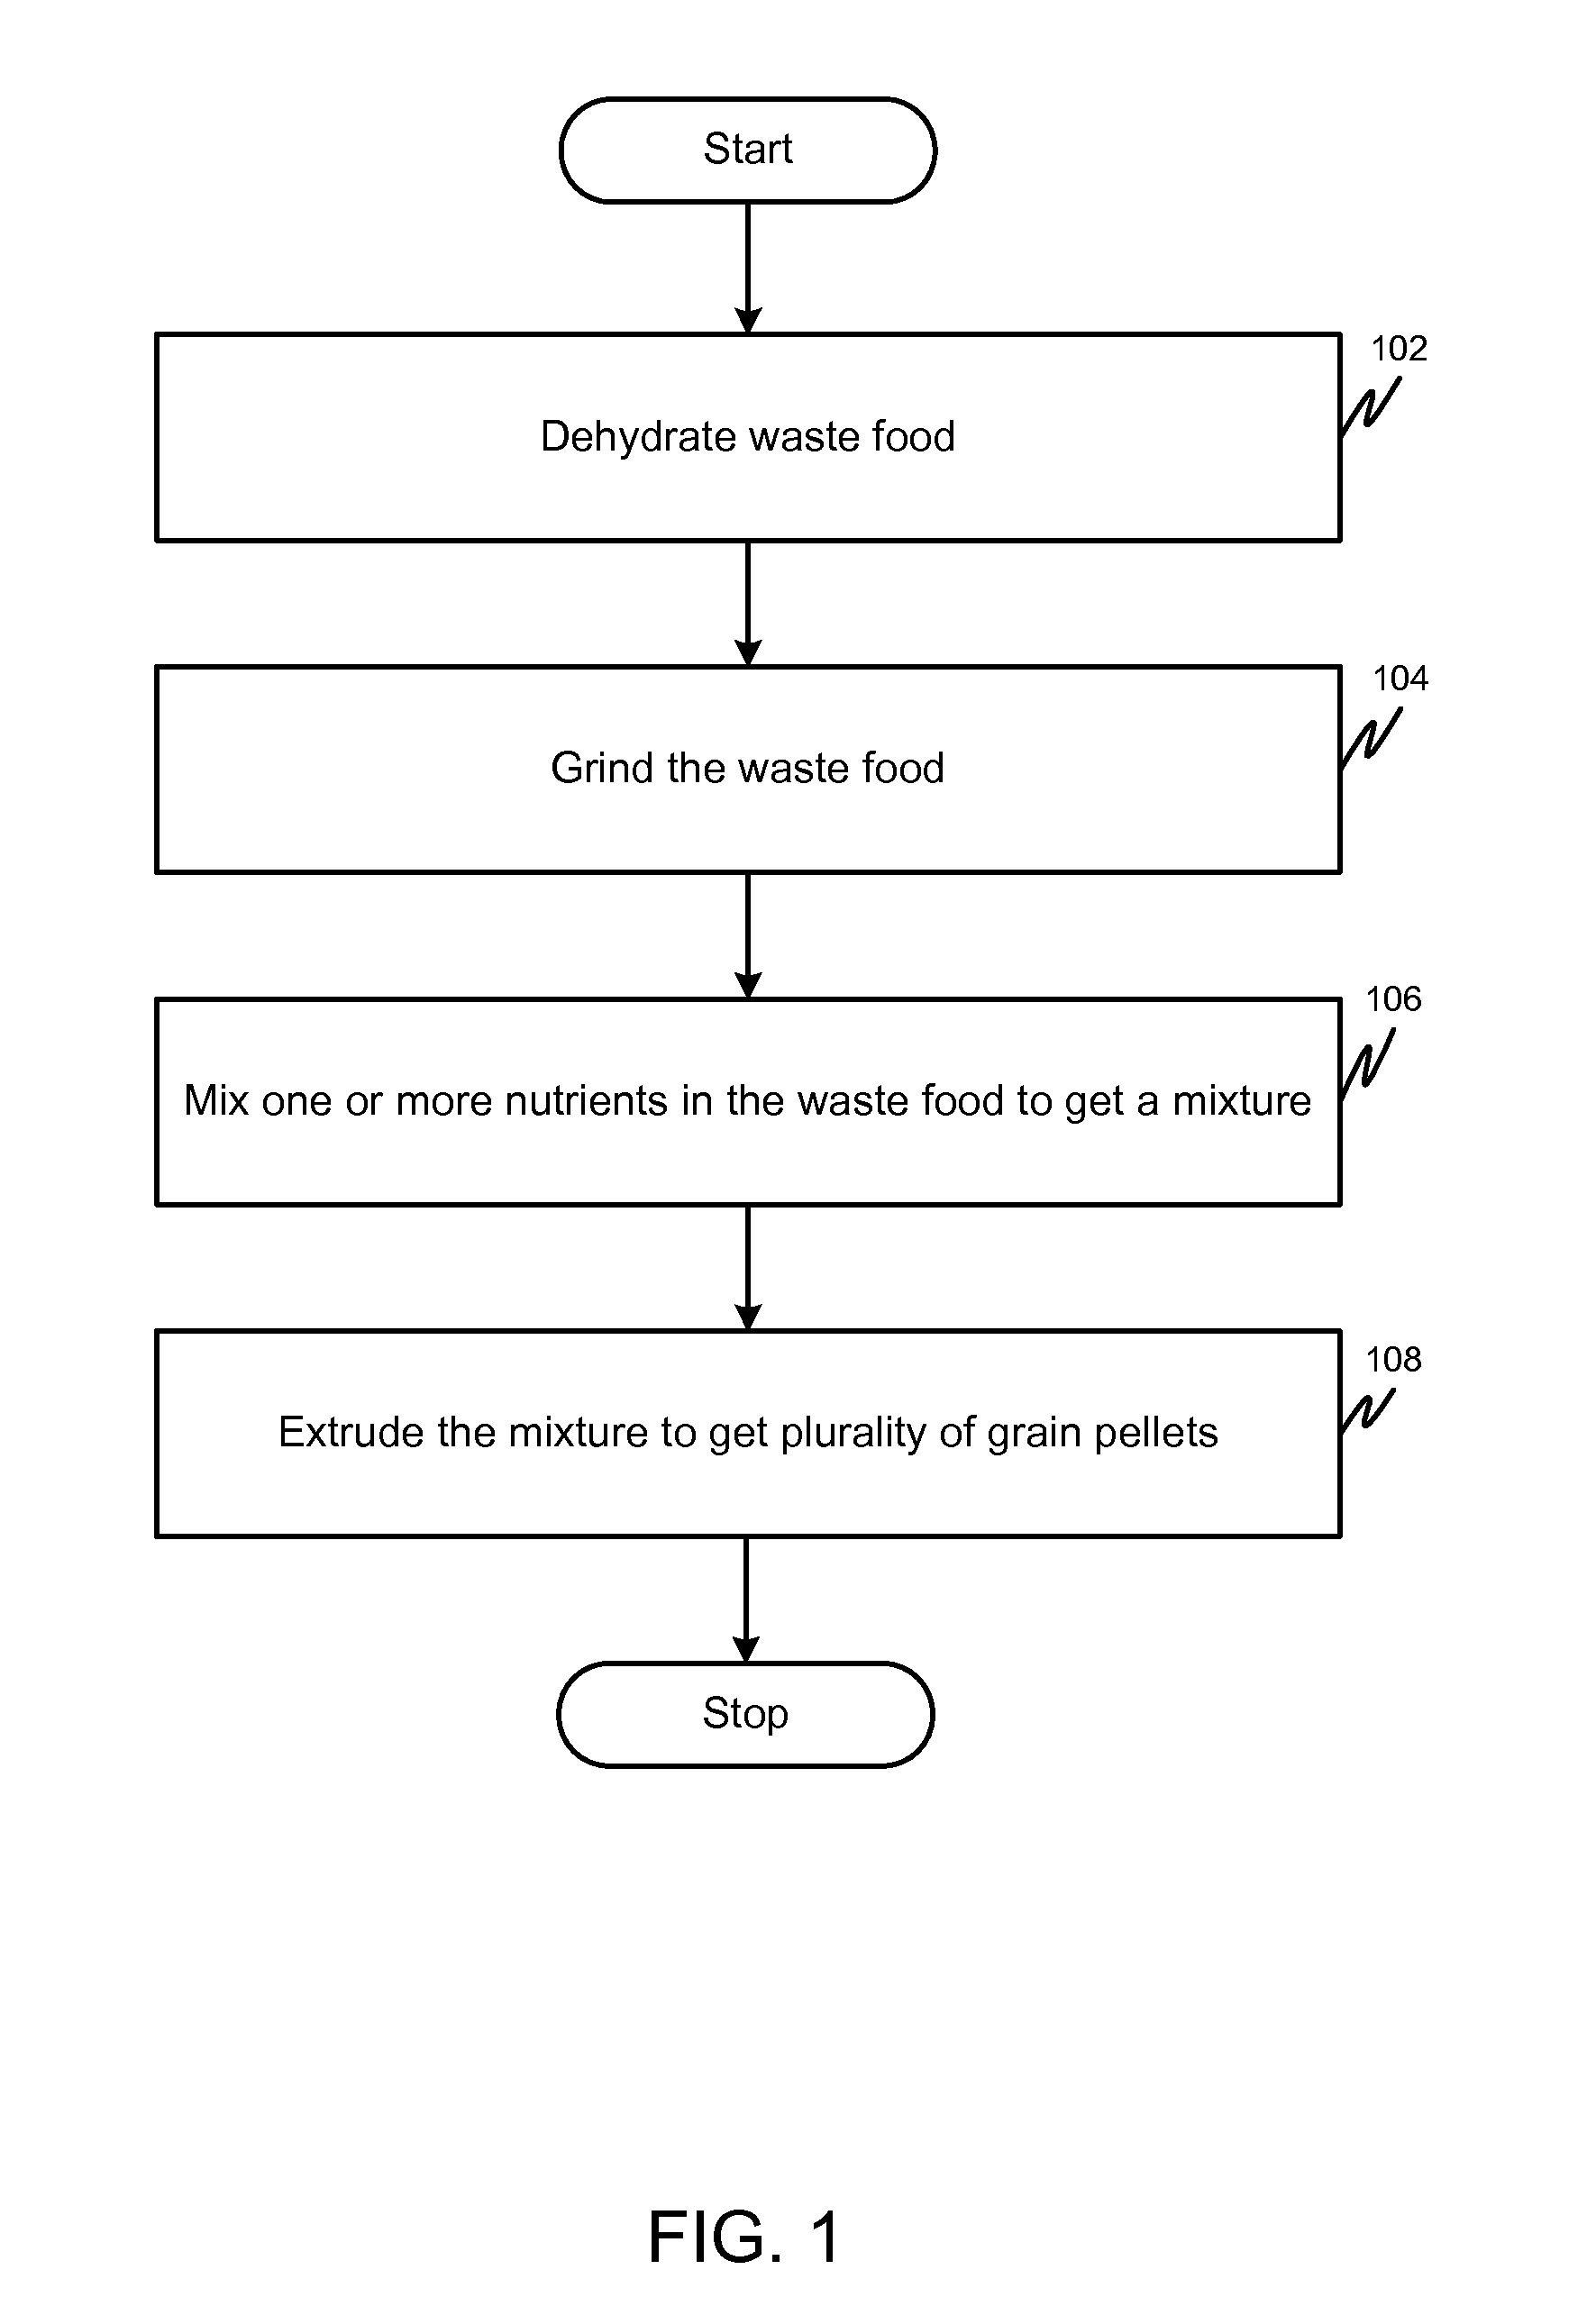 Method and system for deriving animal feed from waste food